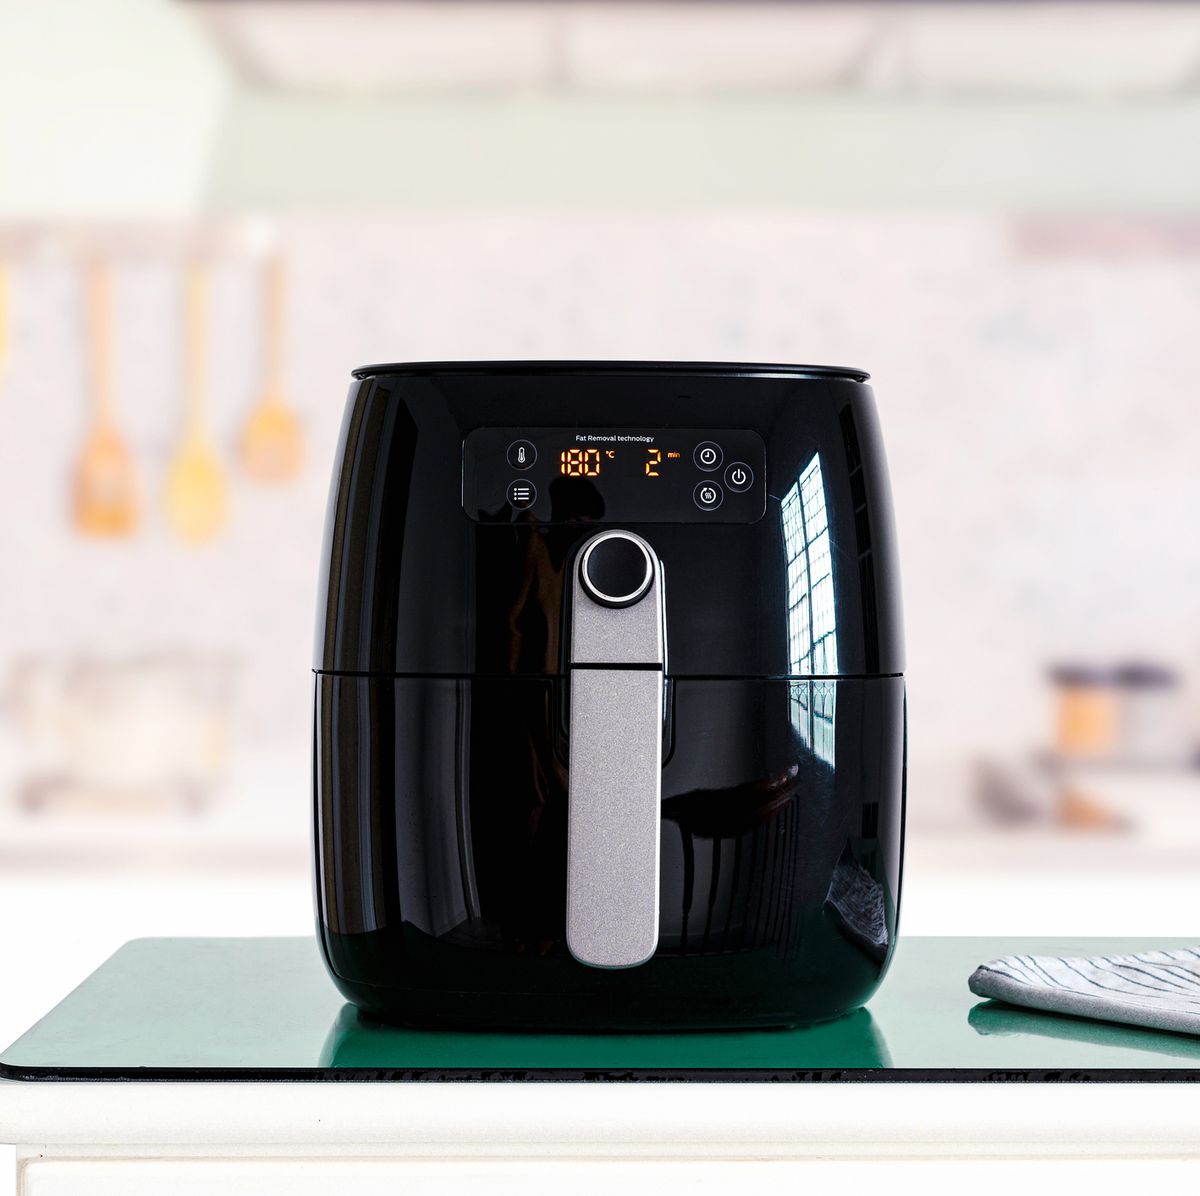 Black Friday air fryer deals: Save on Ninja, Philips, and